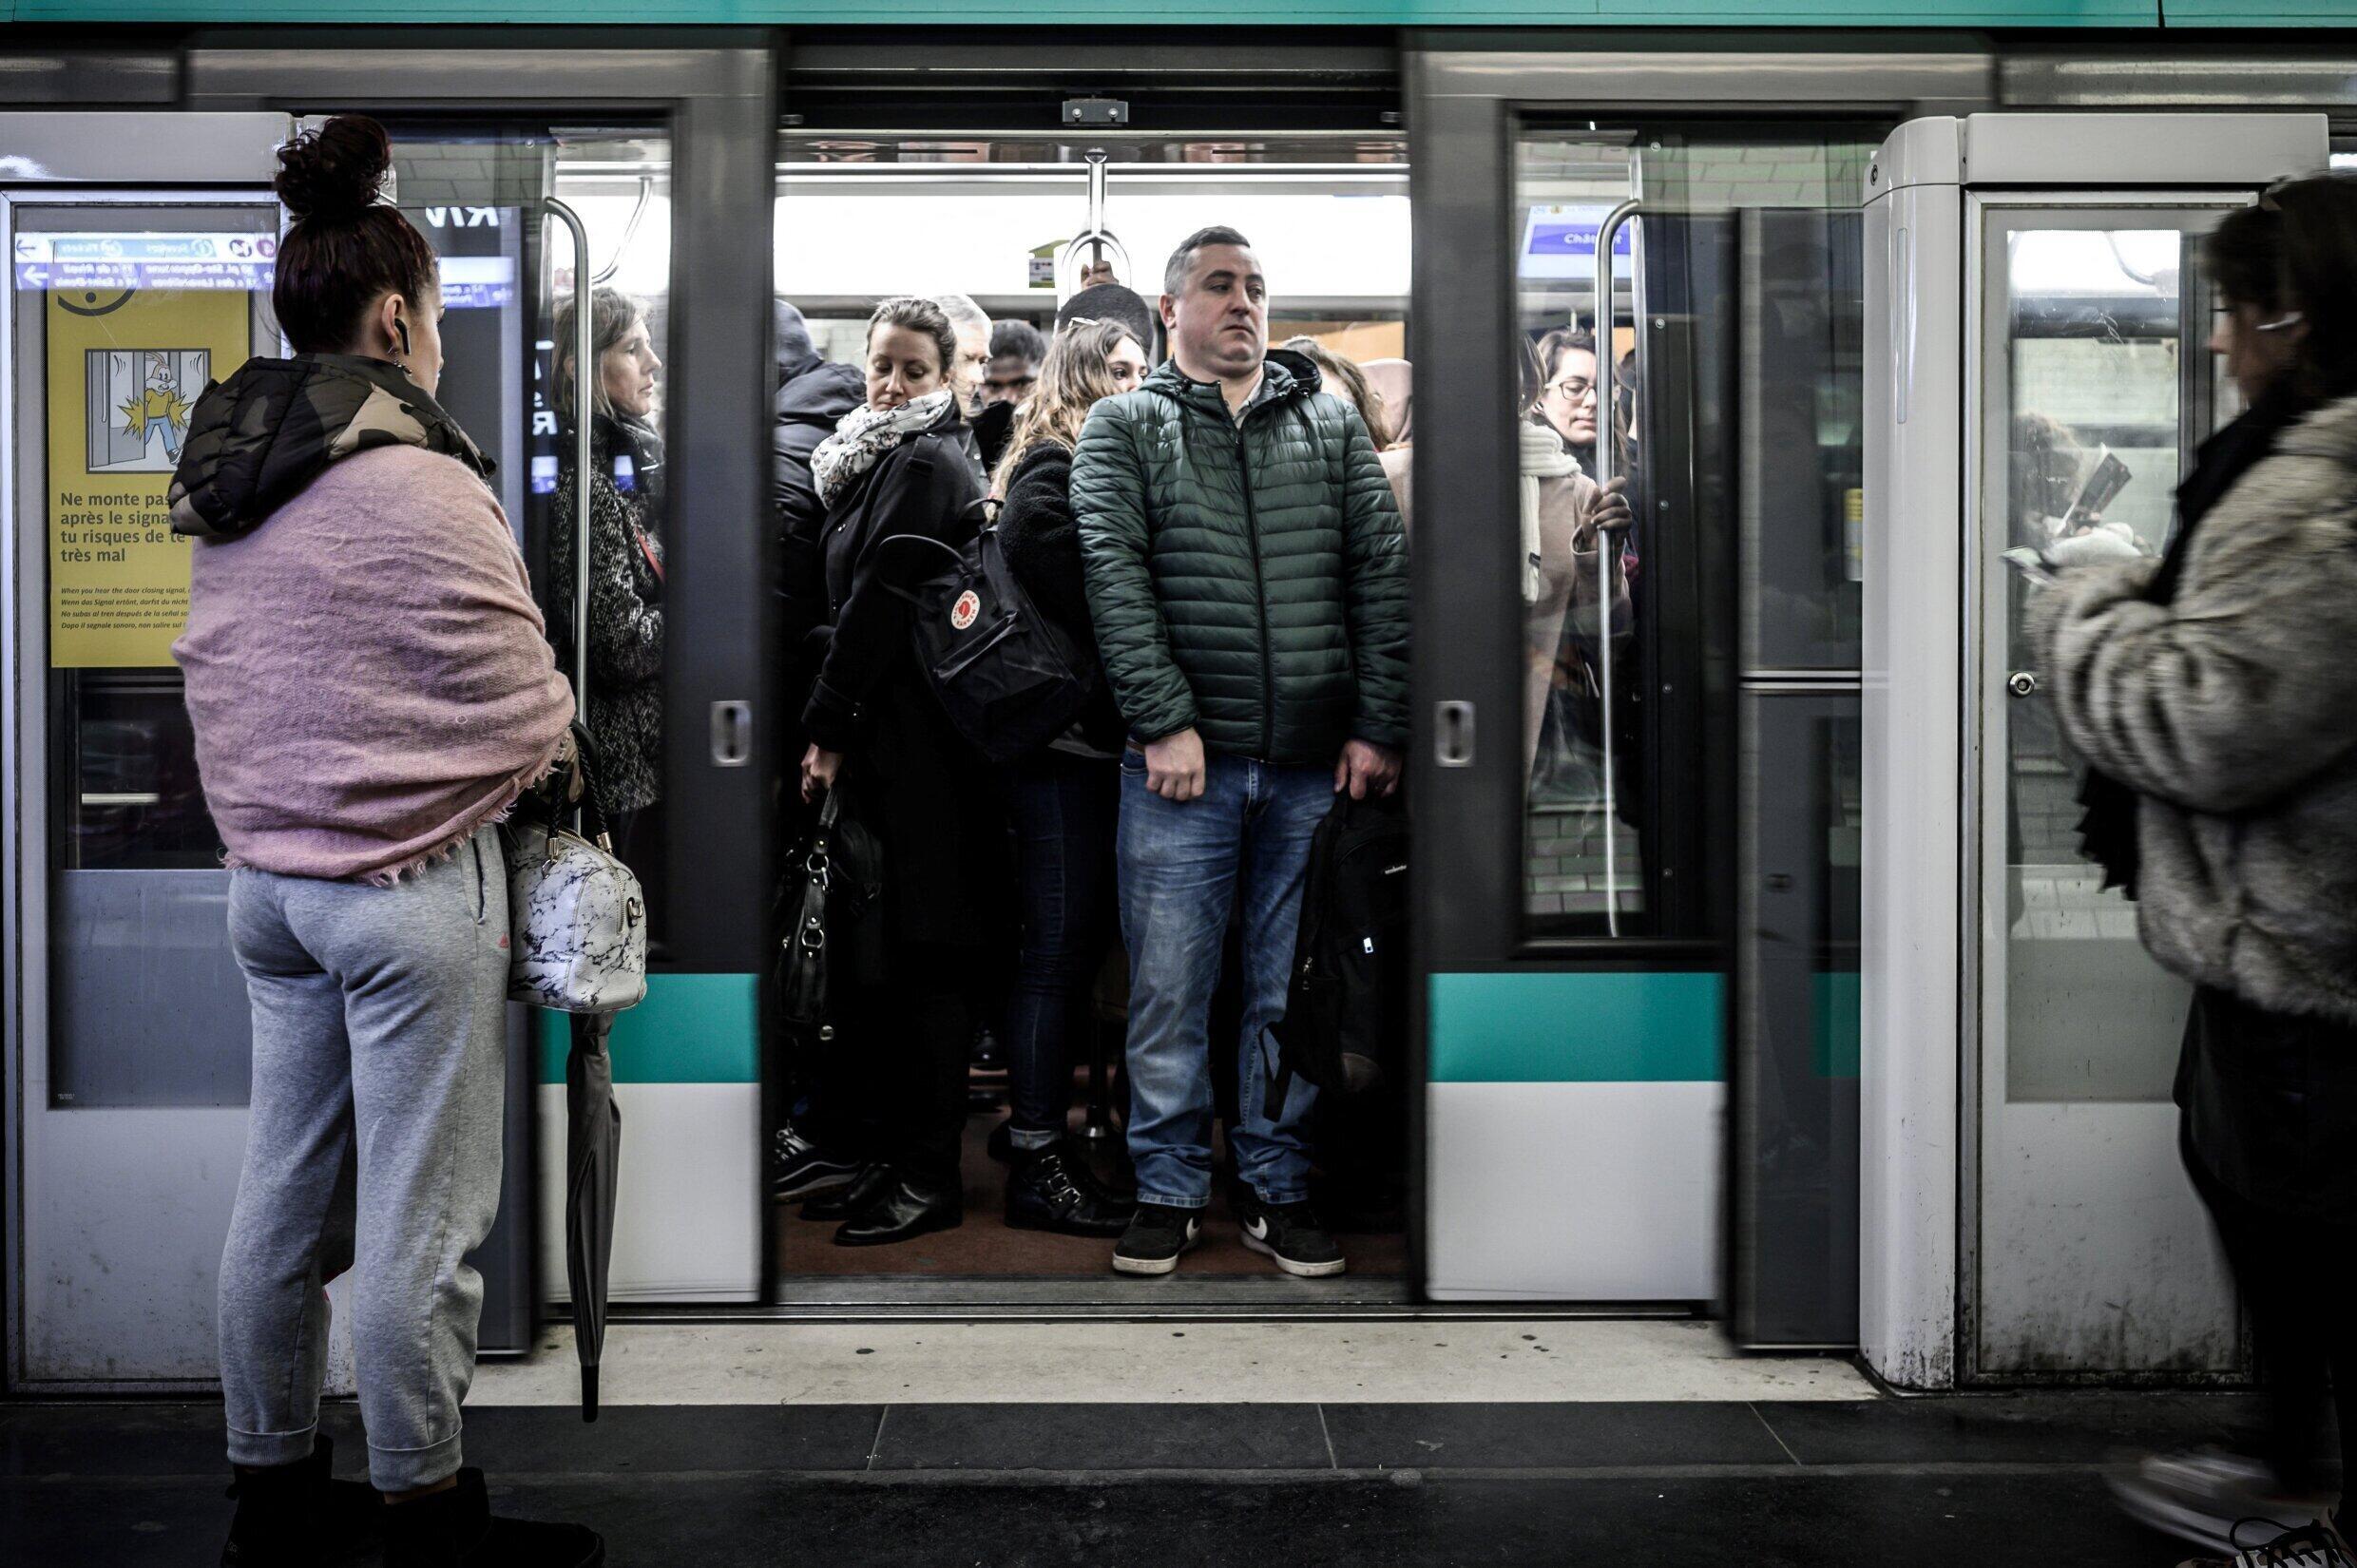 Commuters aboard a train of the subway line 1 which runs through Paris on December 12, 2019 in Paris.